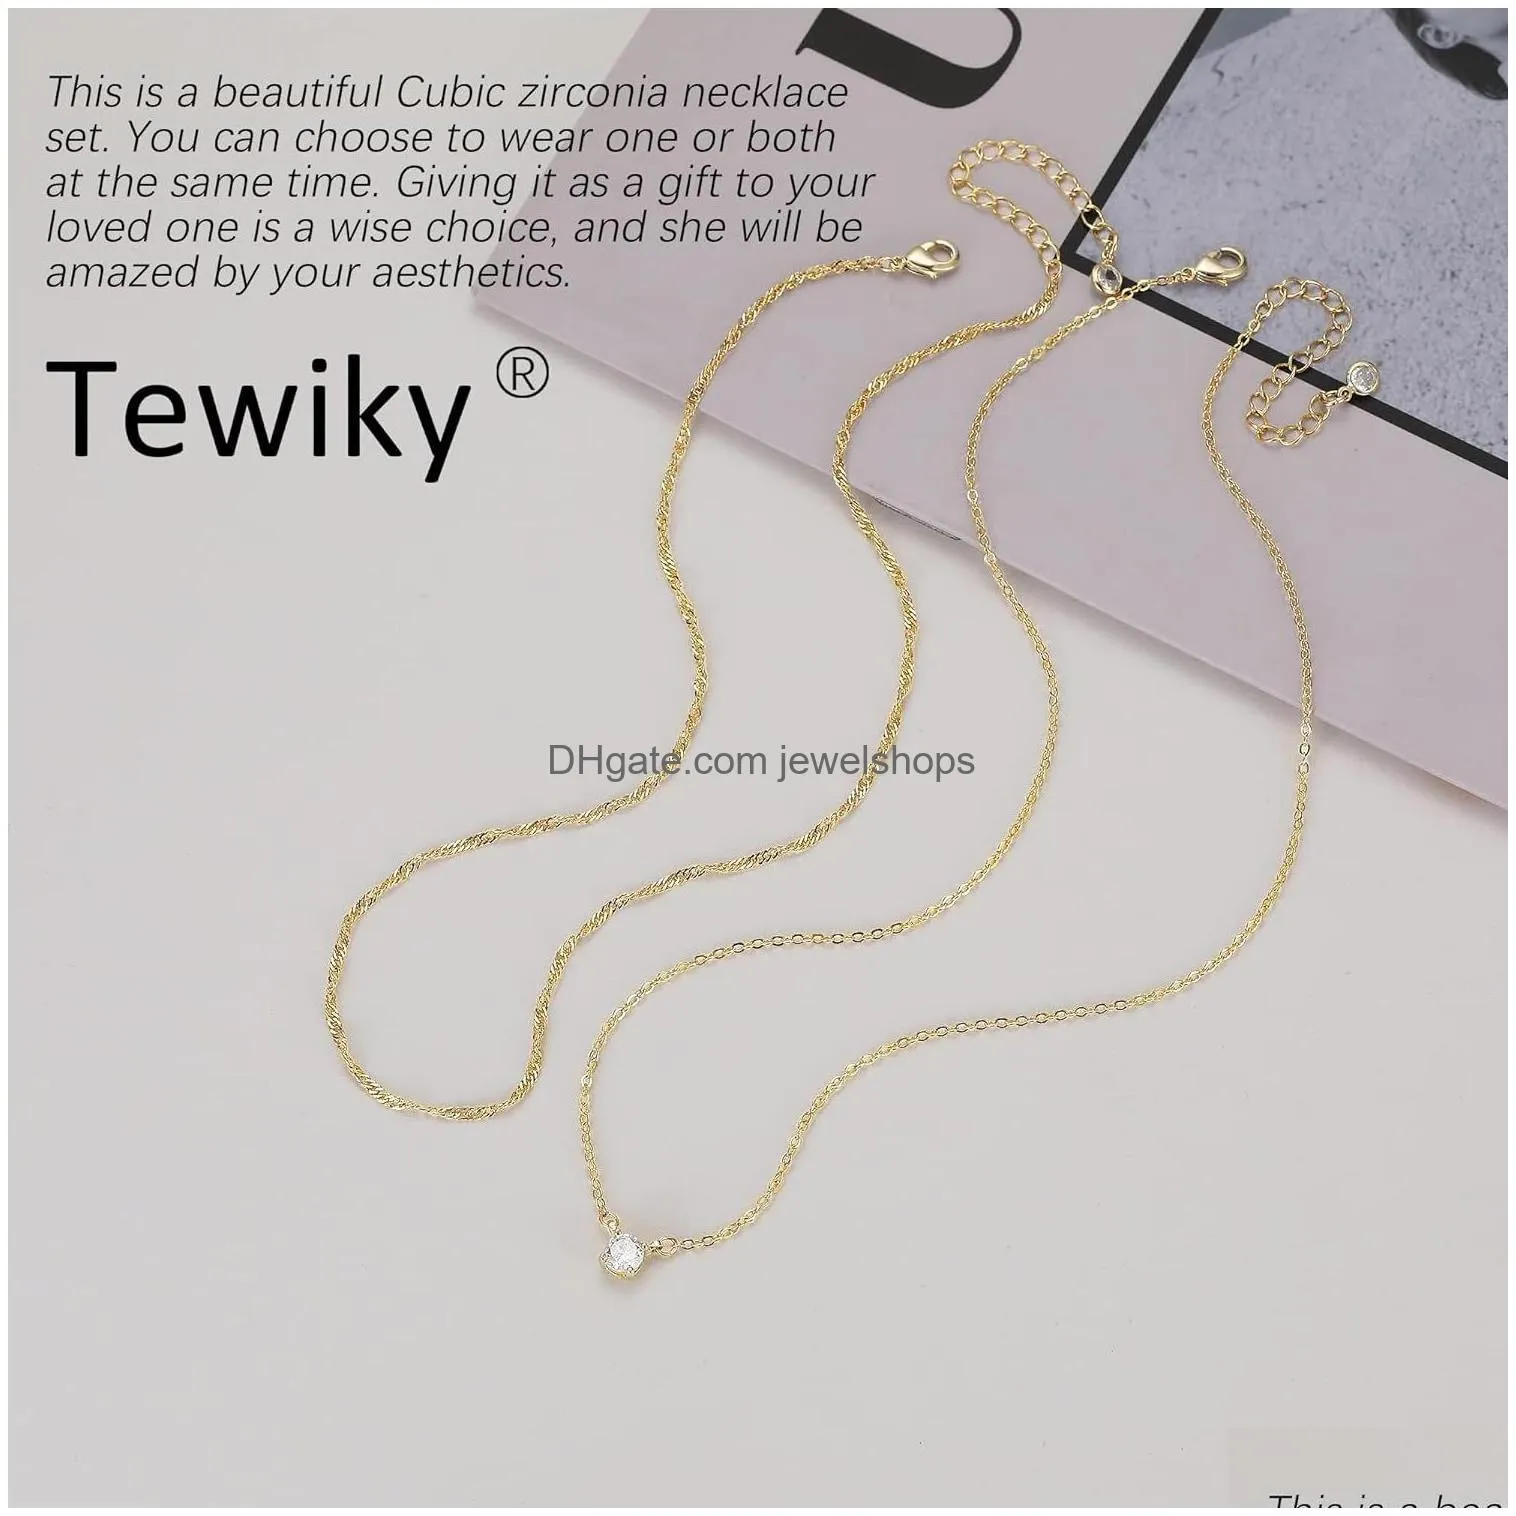 diamond necklaces for women dainty 14k gold plated long lariat necklace simple gold cz diamond choker trendy jewelry gifts for girls